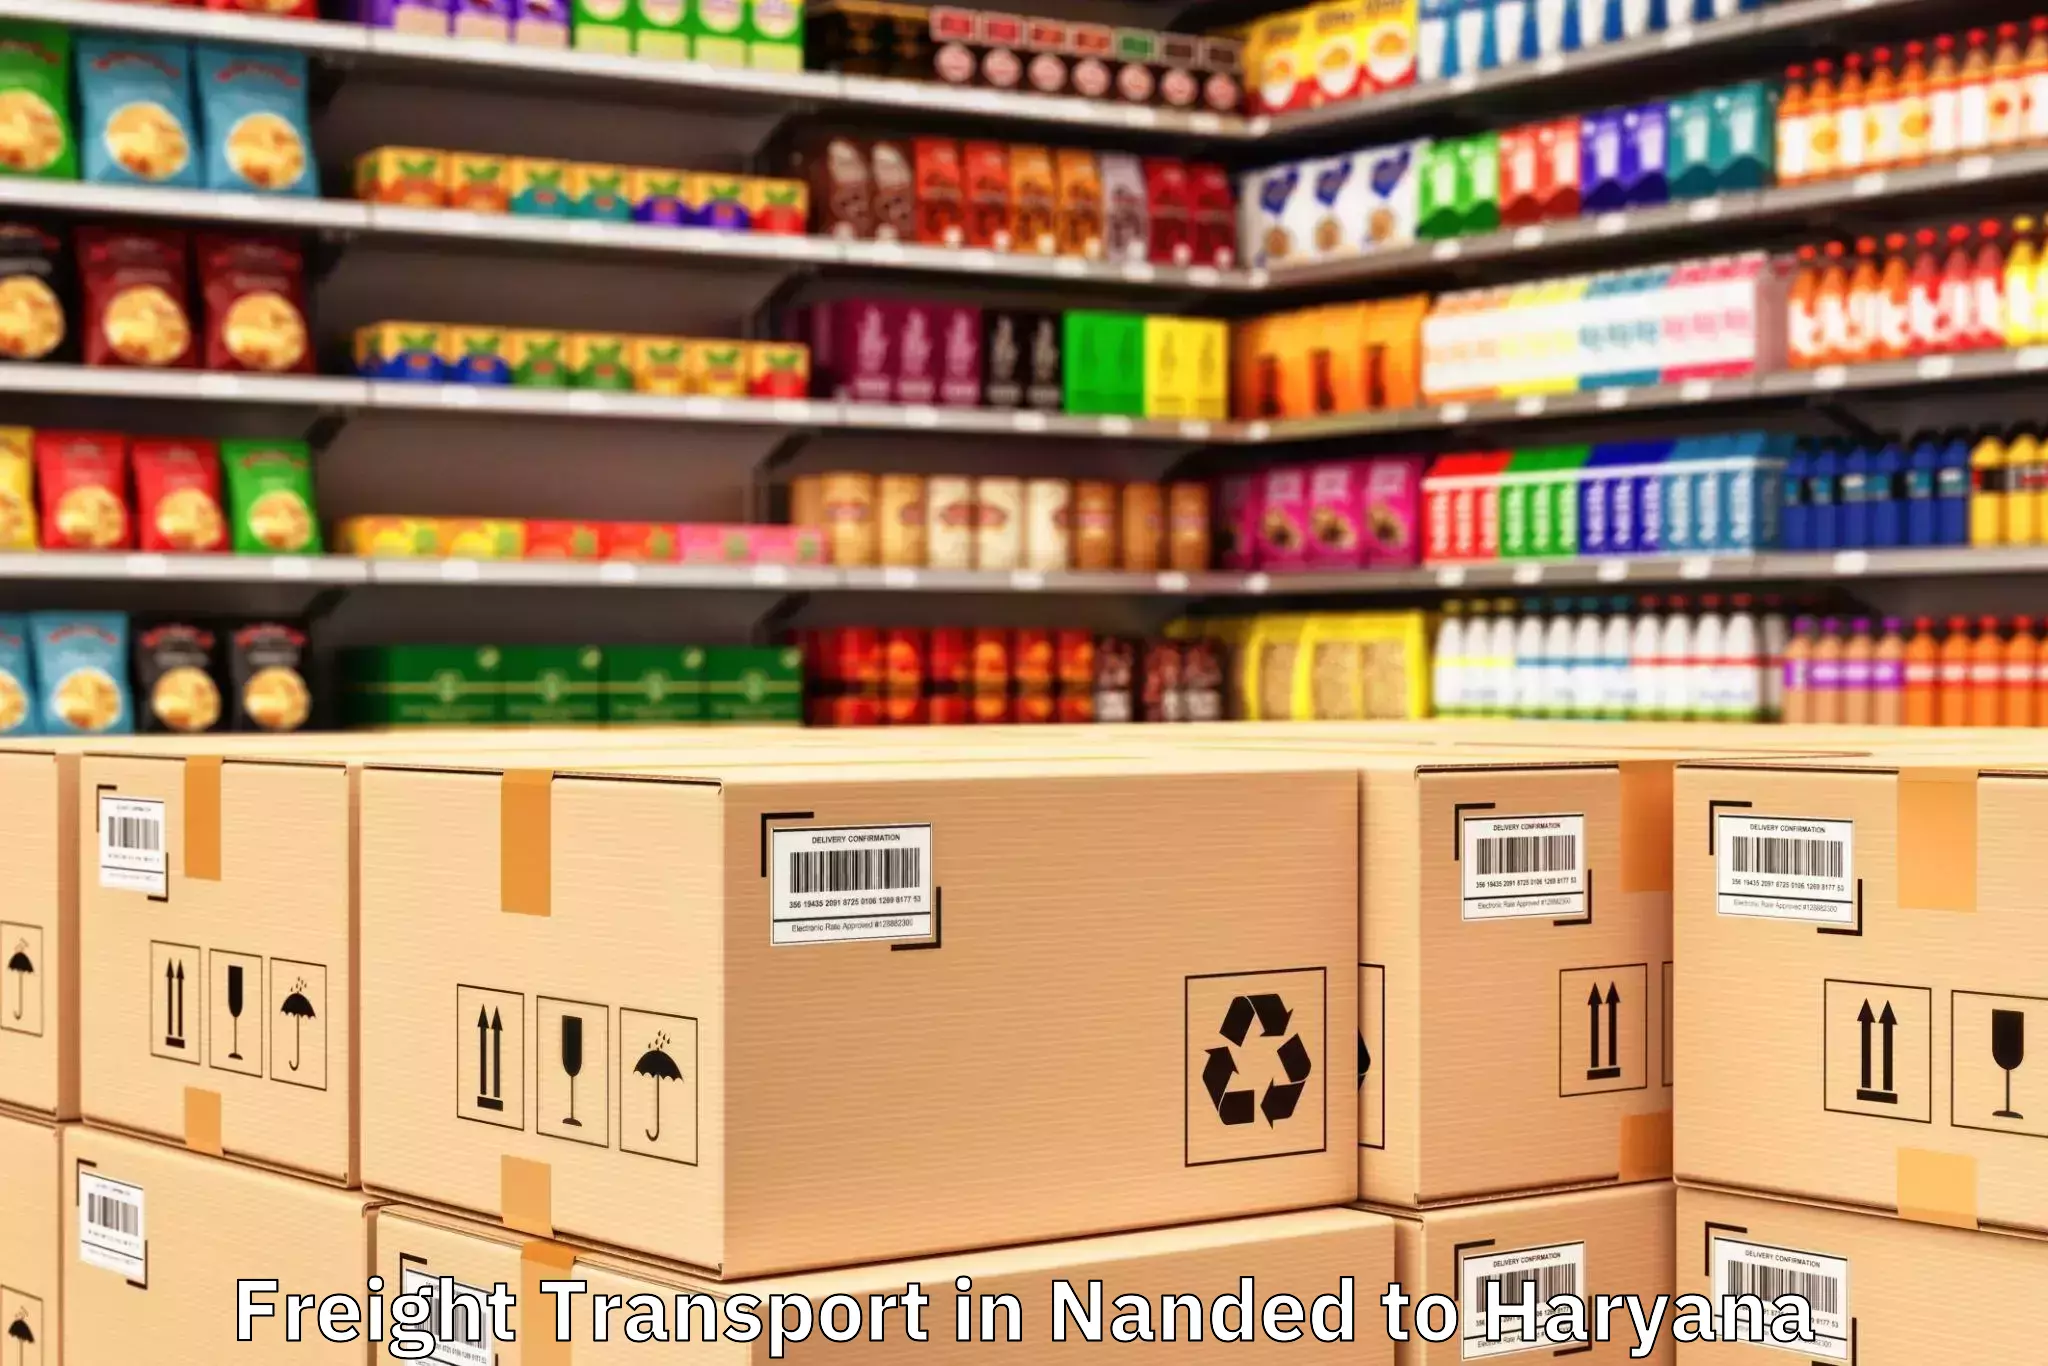 Expert Nanded to Star Mall Gurgaon Freight Transport